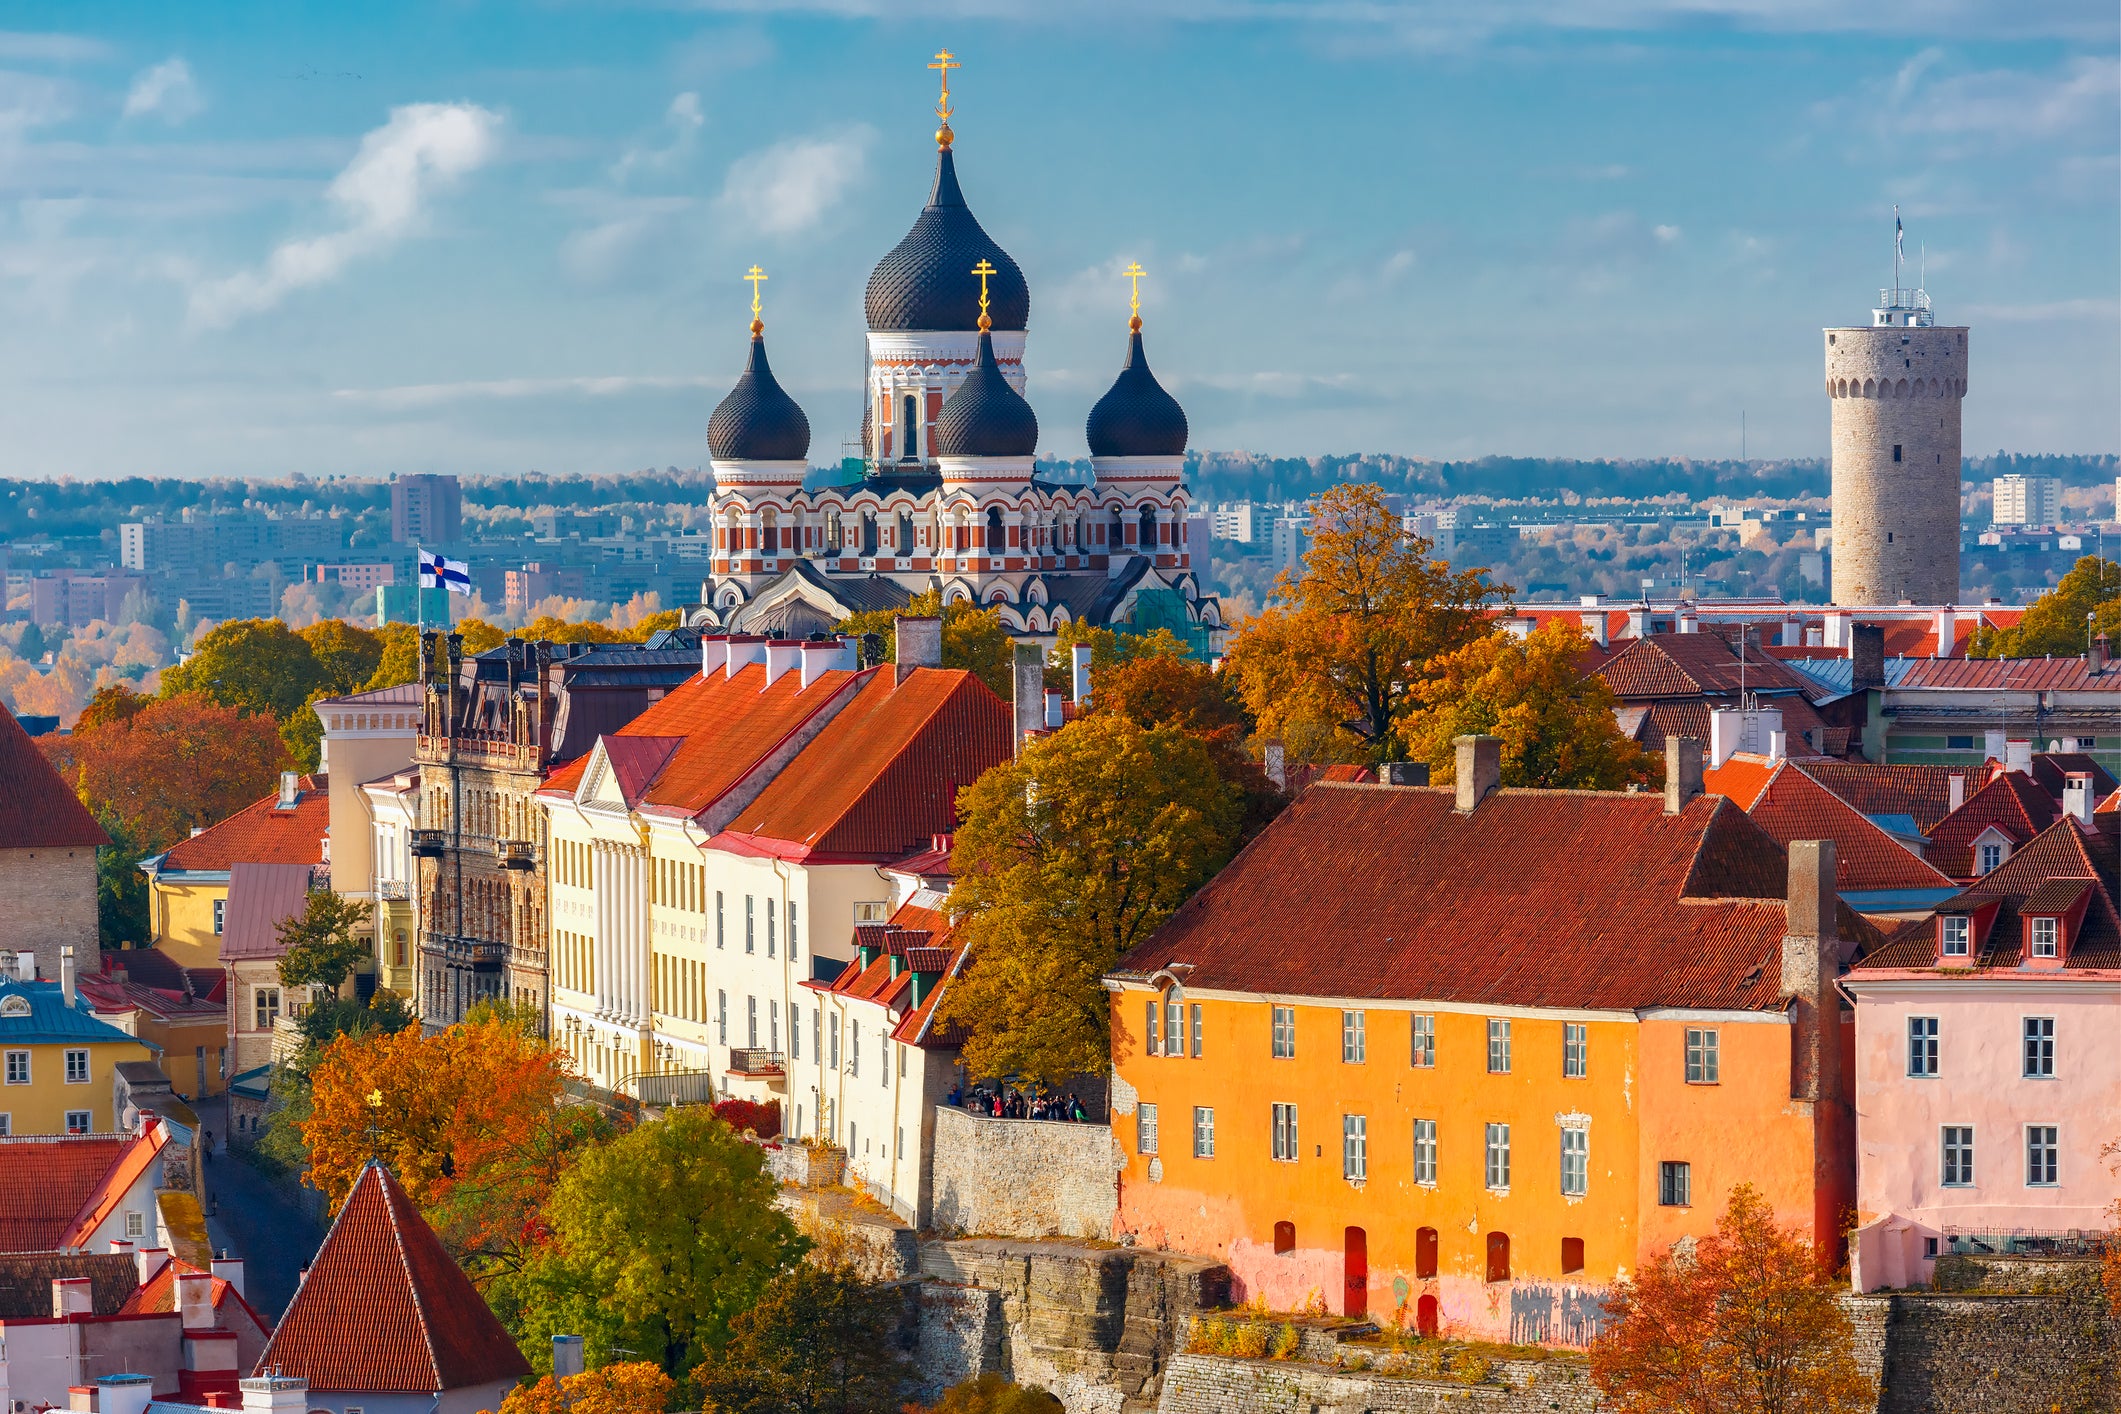 Tallinn has been named the number one city for digital nomads